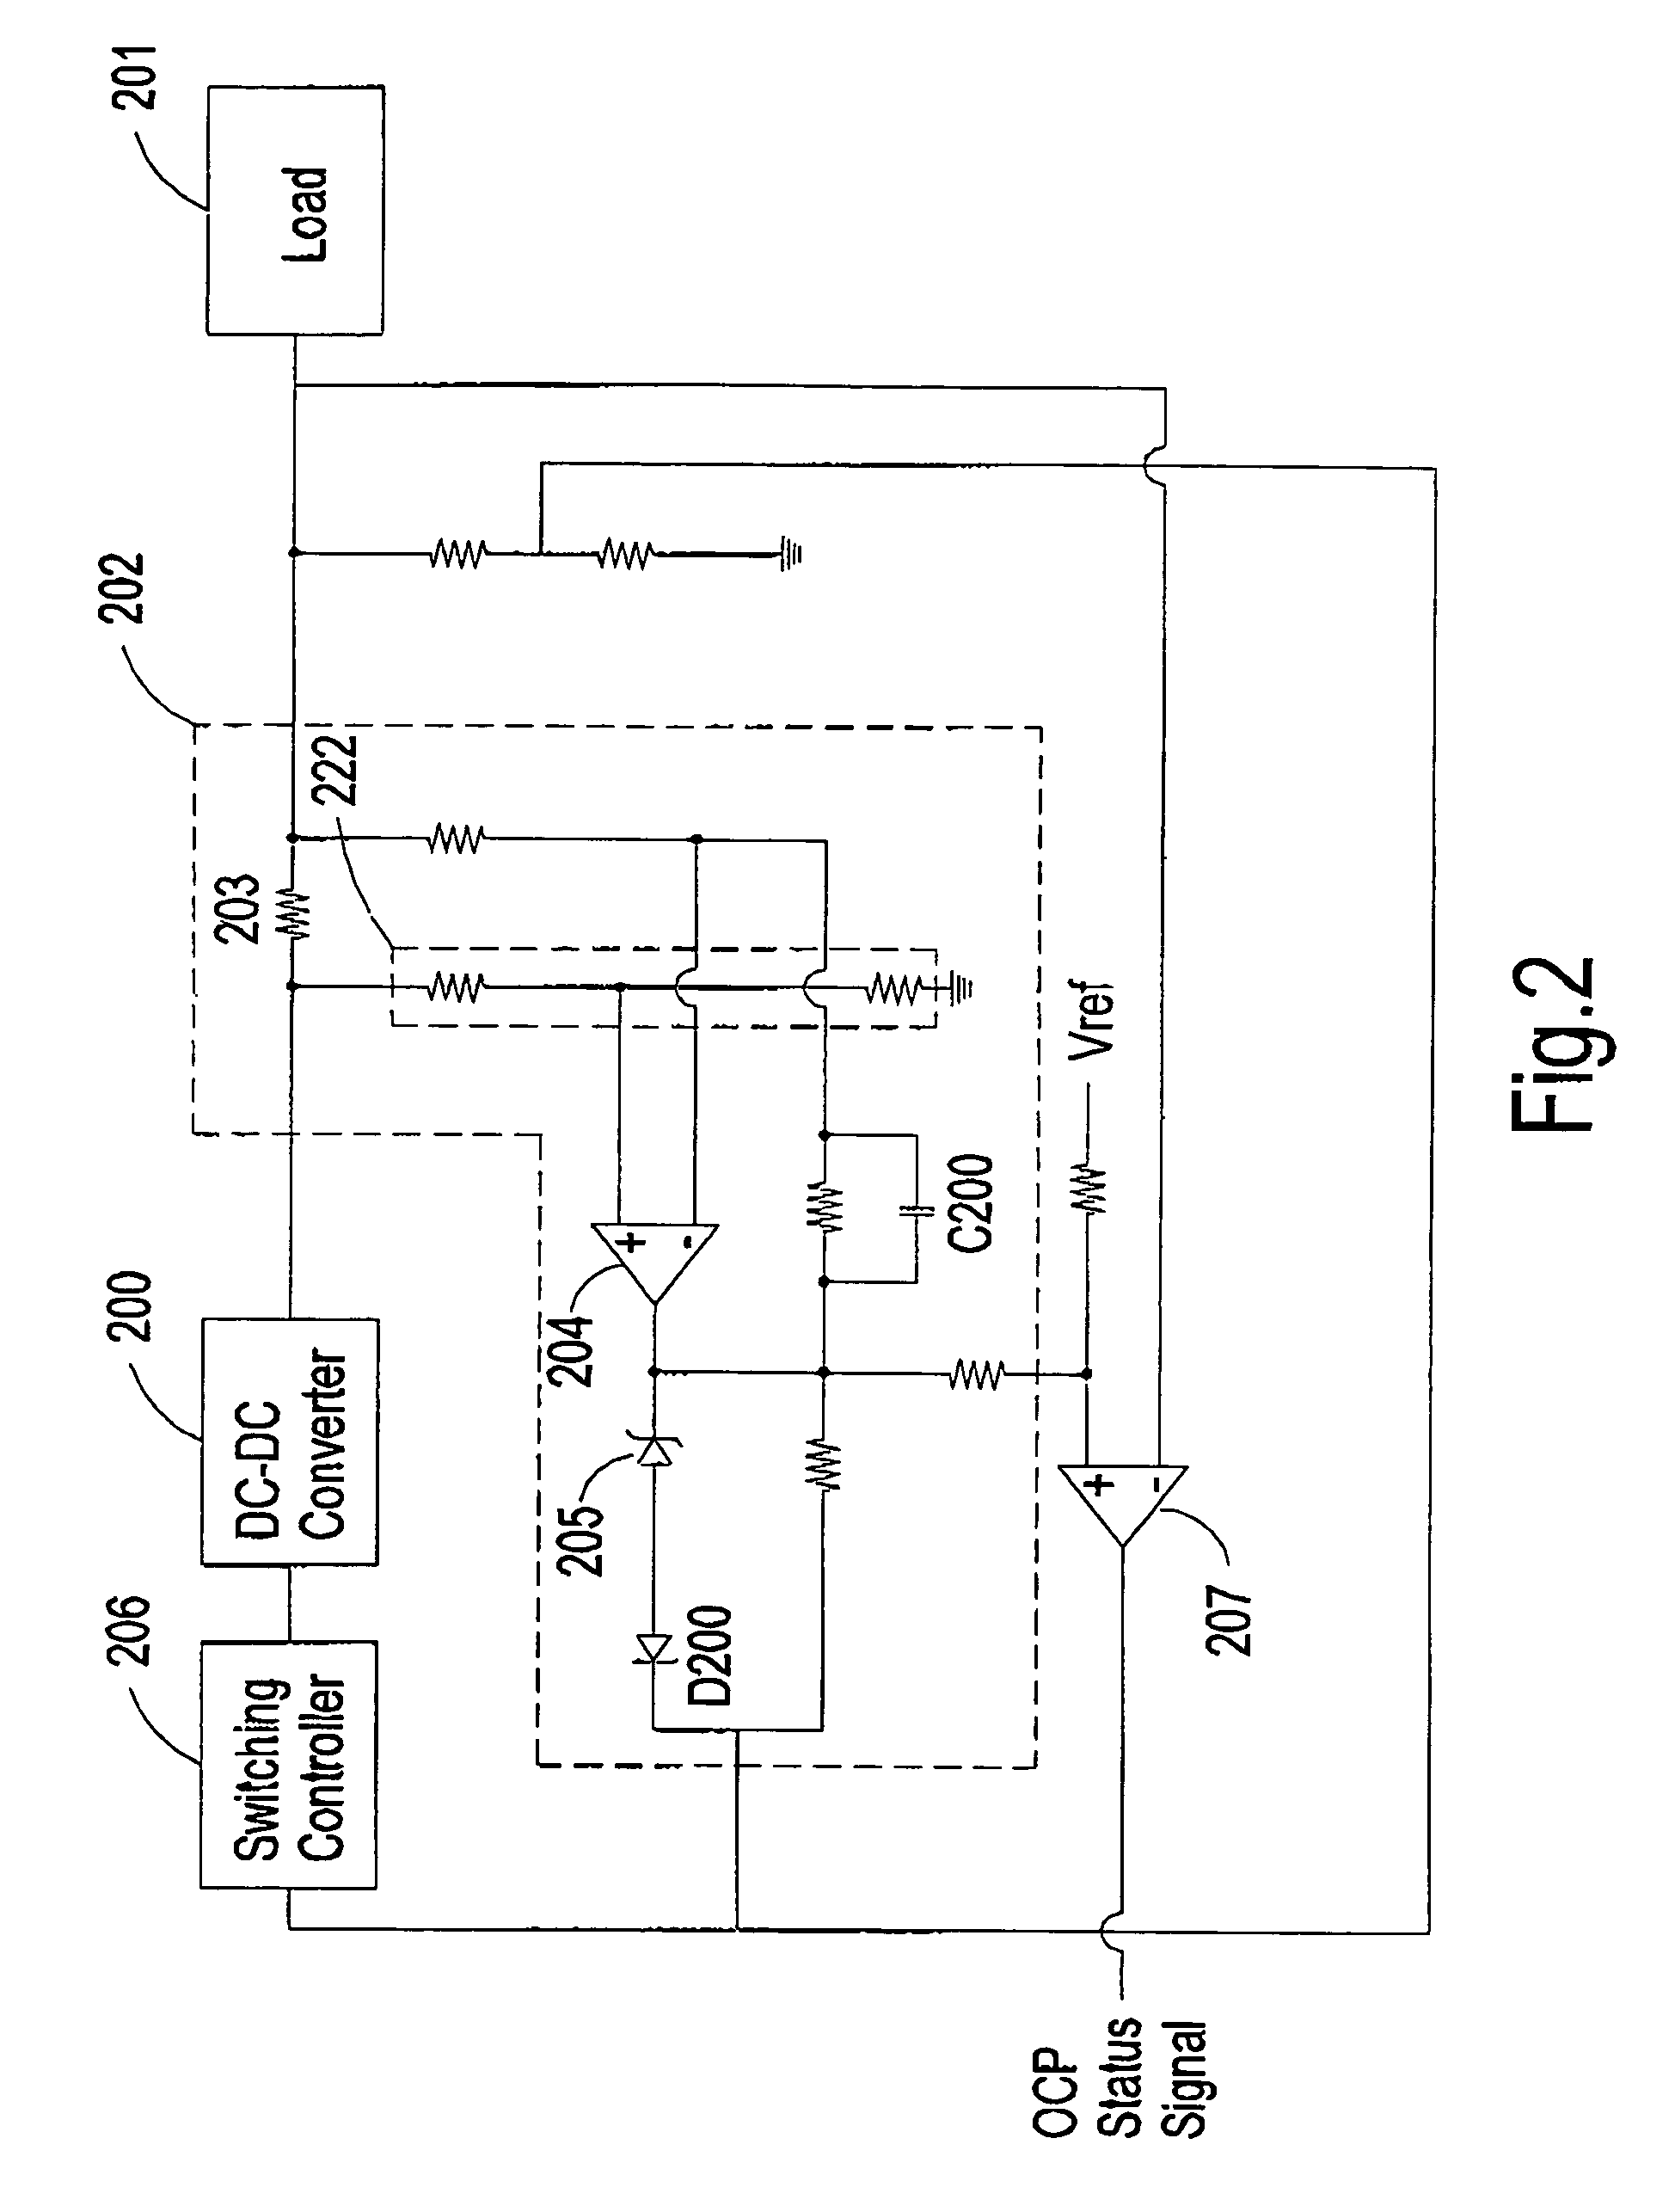 Parallel power supply with active droop current sharing circuit having current limiting function